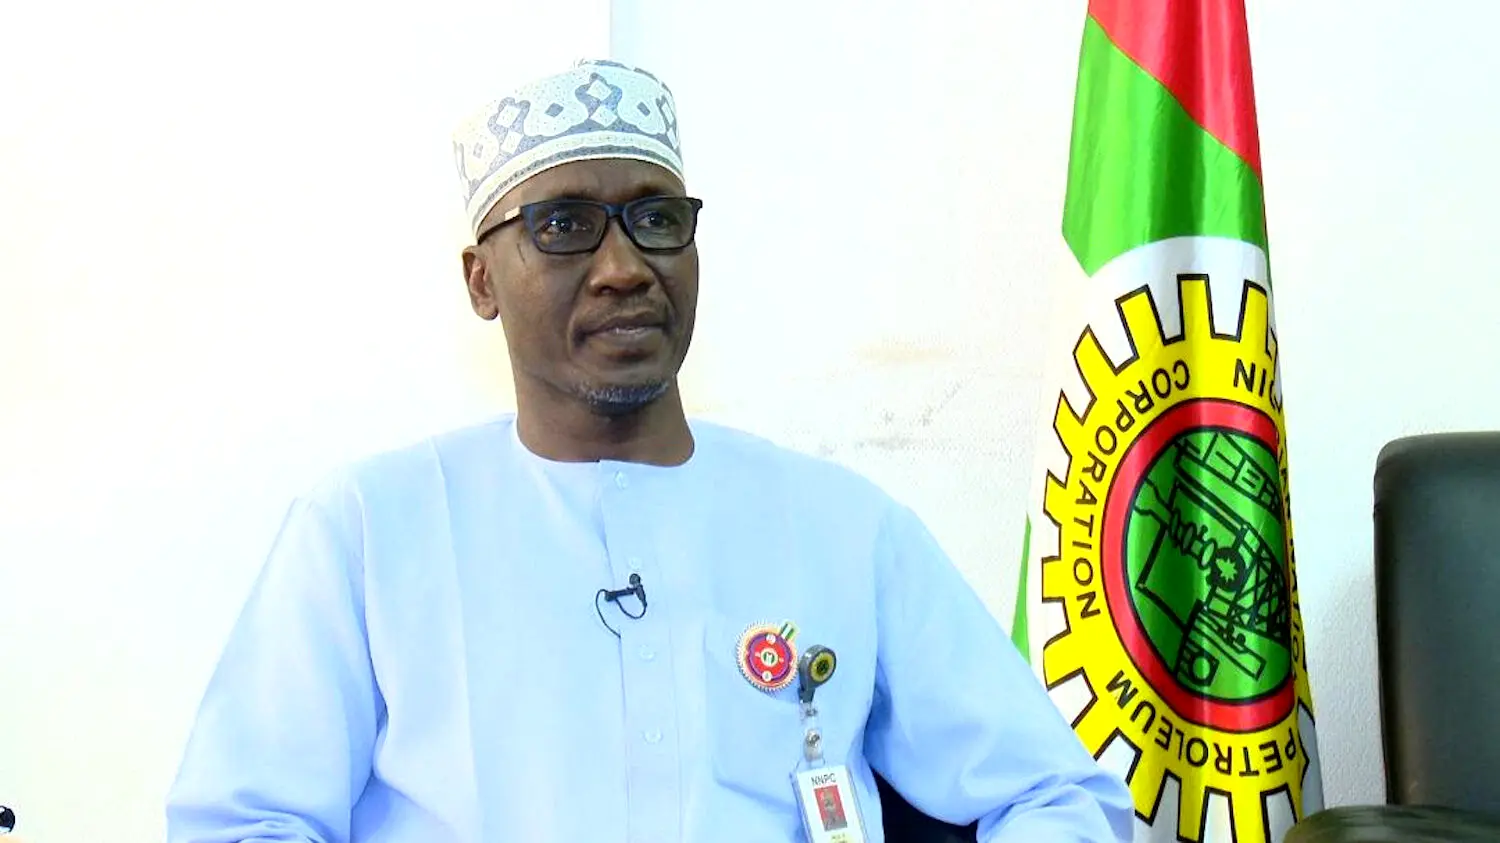 Daily fuel supply remains 68m litres, NNPC insists